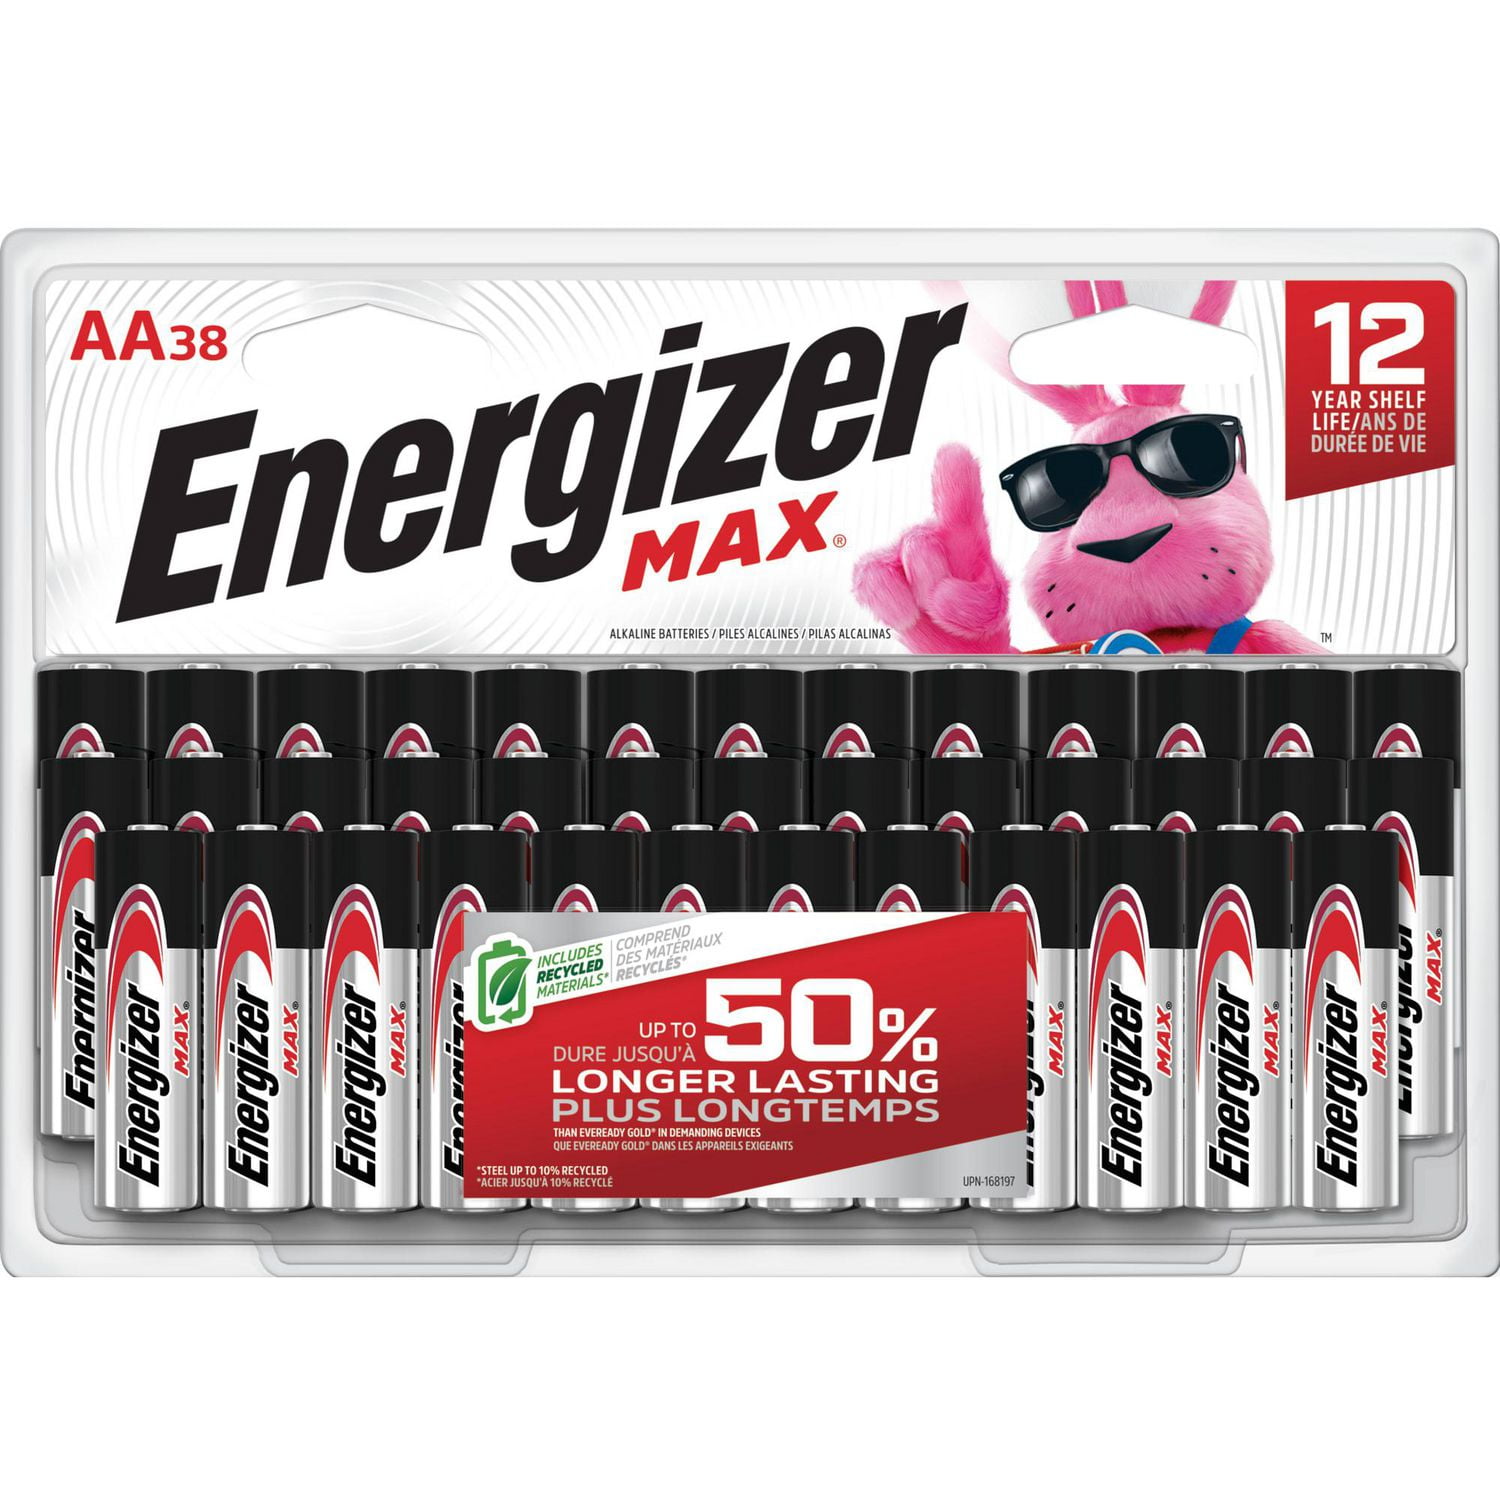 Energizer MAX AA Batteries (38 Pack), Double A Alkaline Batteries